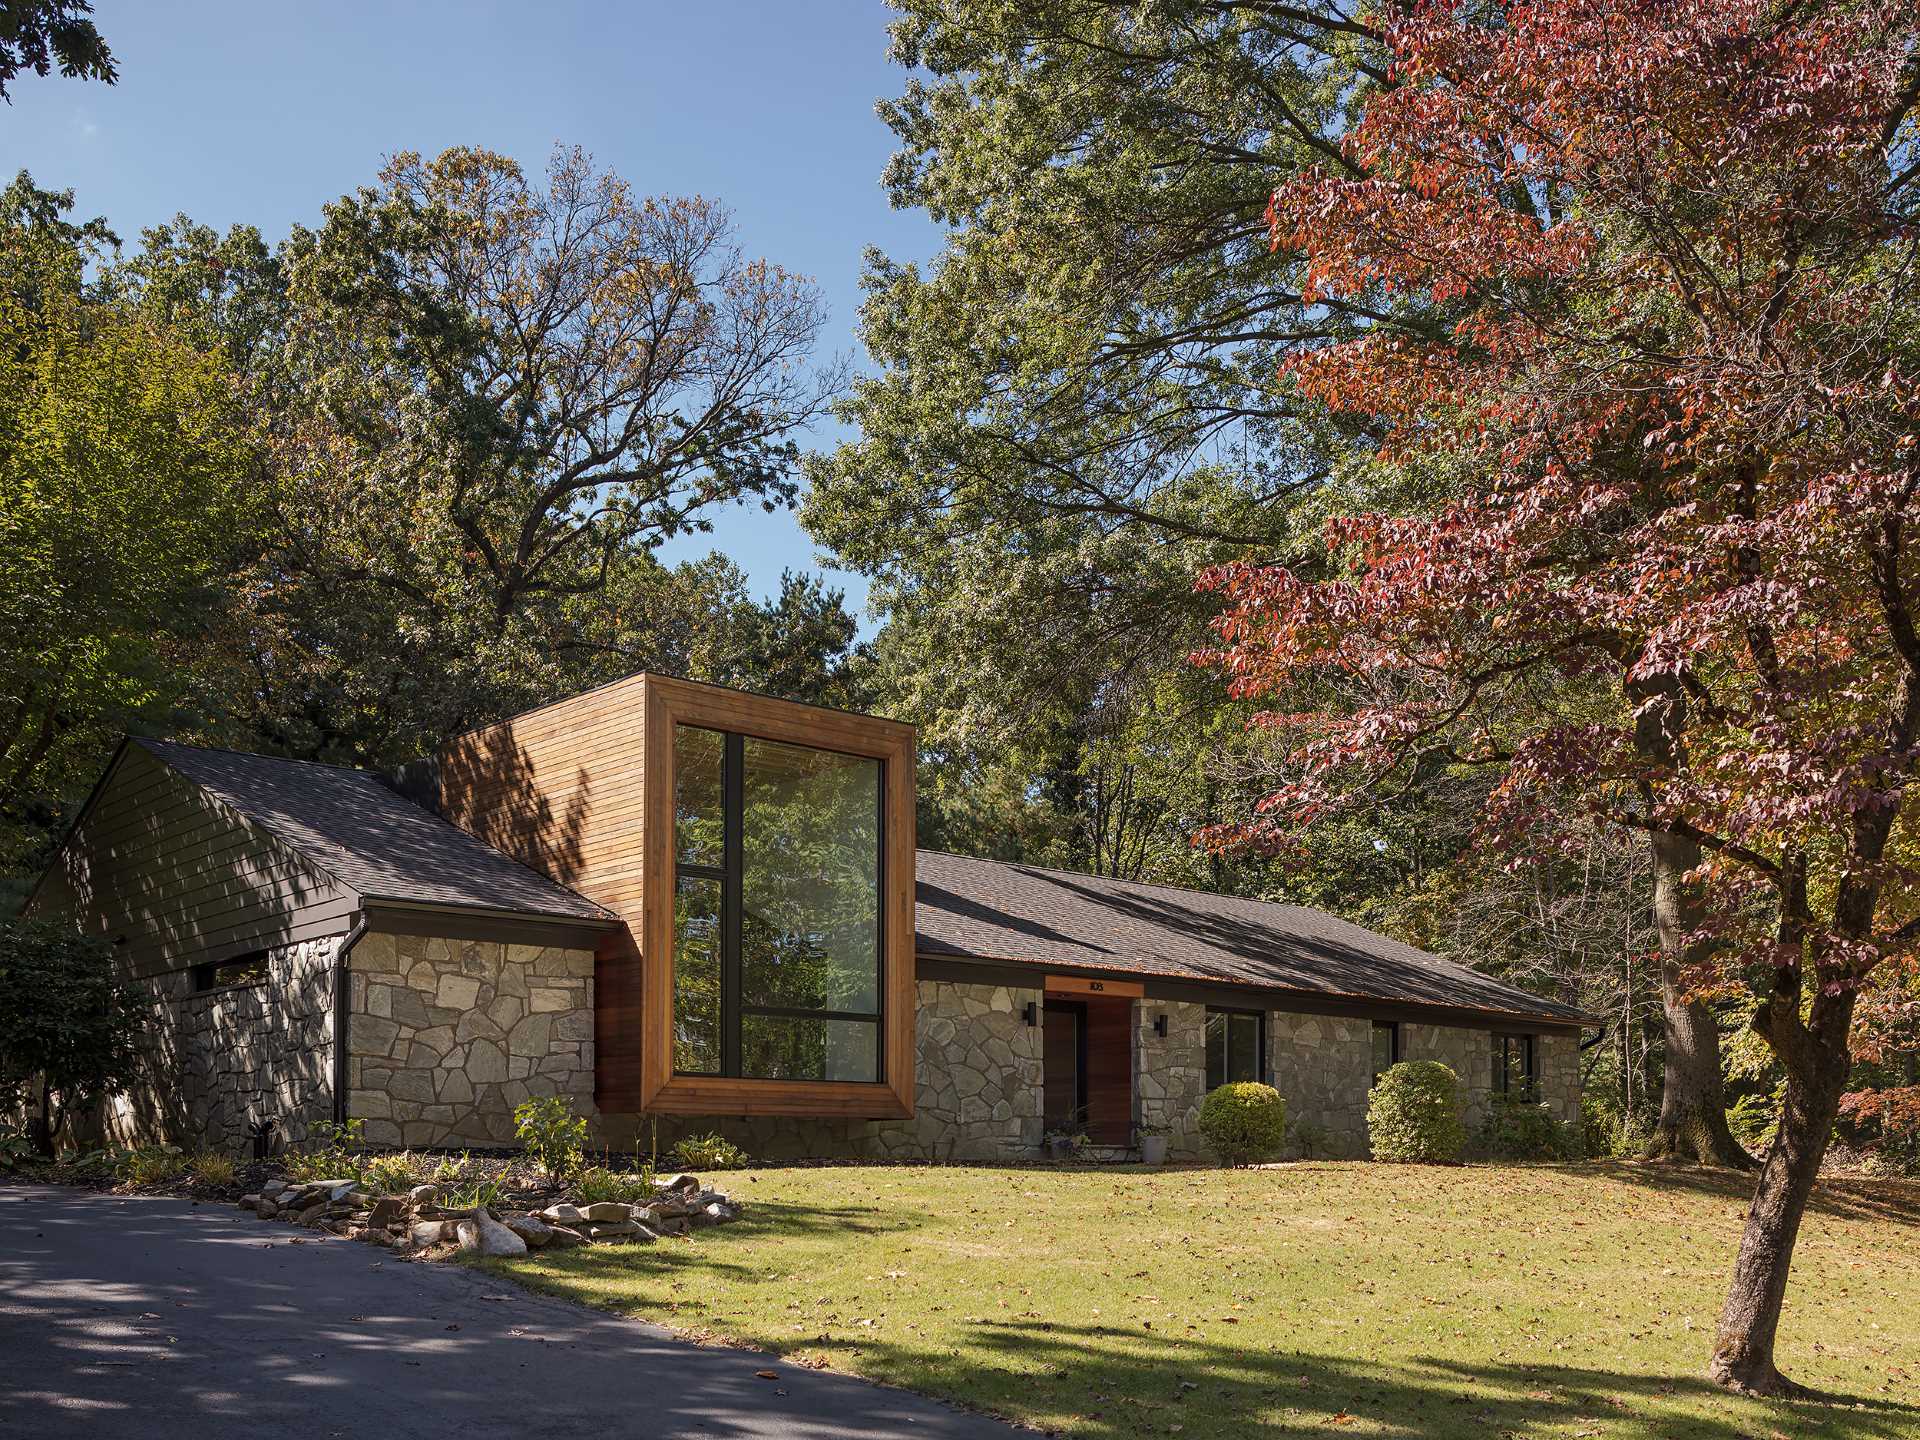 A remodeled 1950s ranch home with stone walls and a cedar-clad accent.